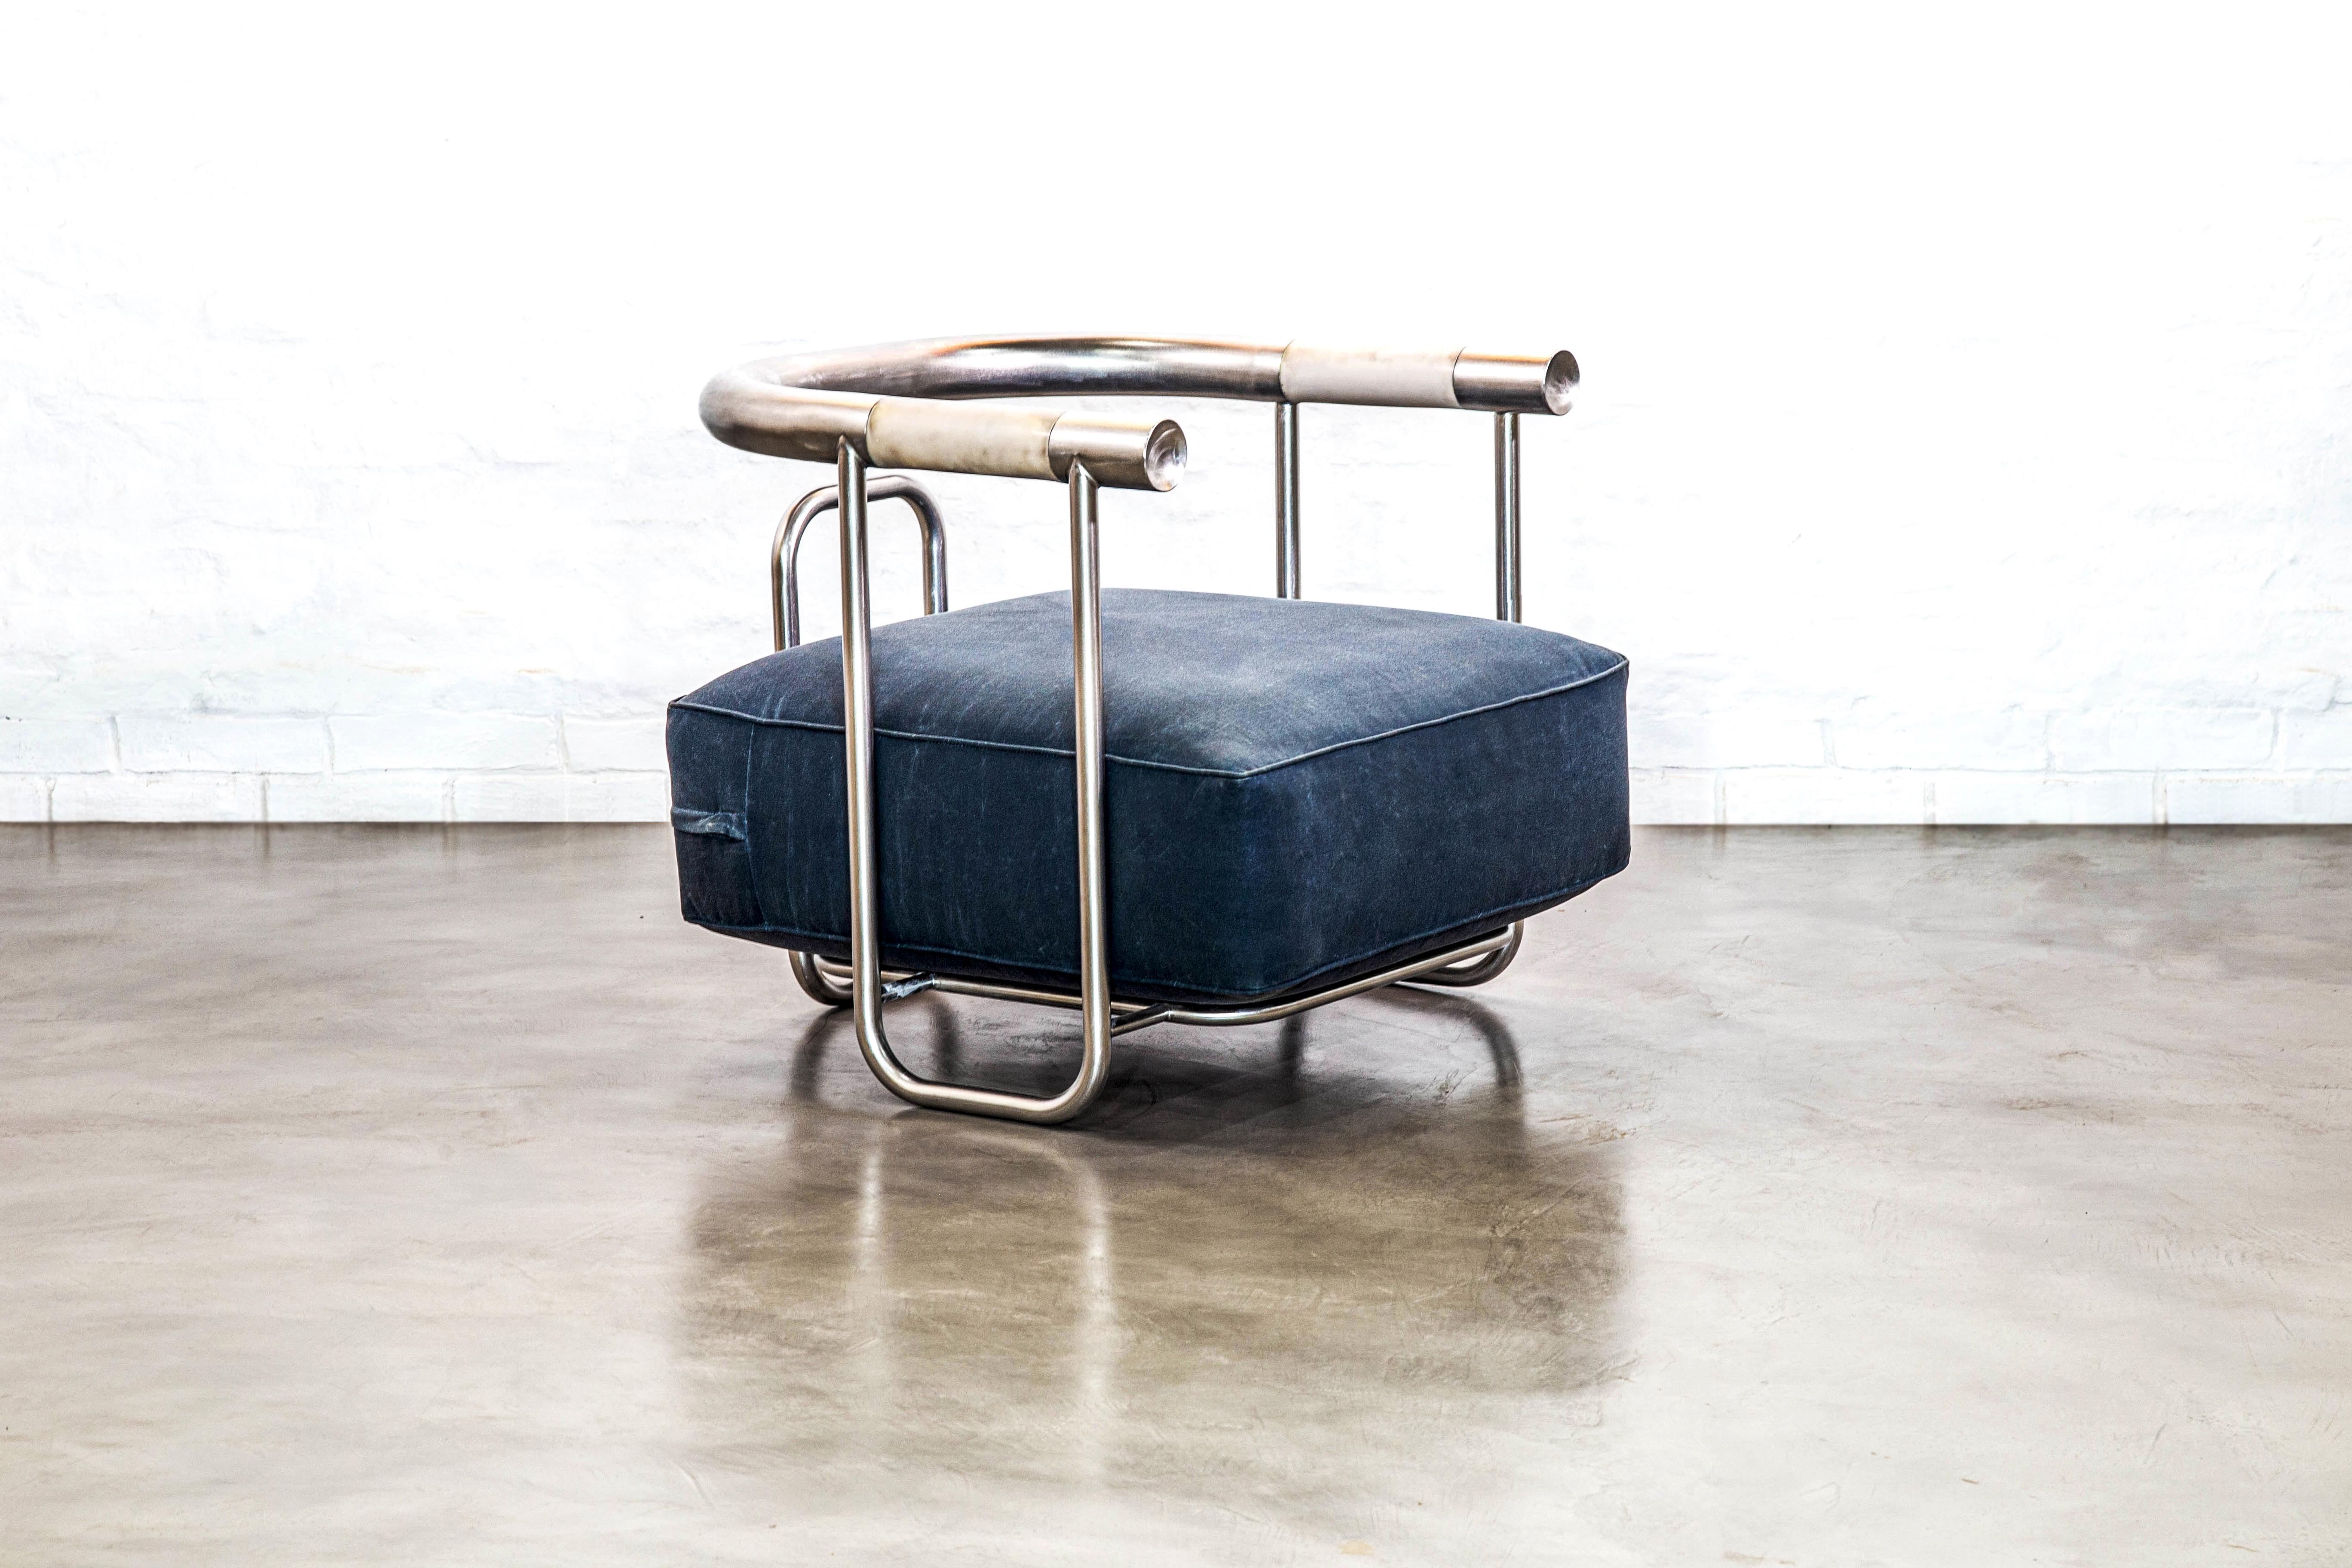 Studio Armin’s Baby Bull is a nautically inspired chair that was built to withstand the outdoors while being versatile enough for indoor living.
 
With a stainless-steel frame and wax canvas cushion, the Baby Bull is left to form and function while